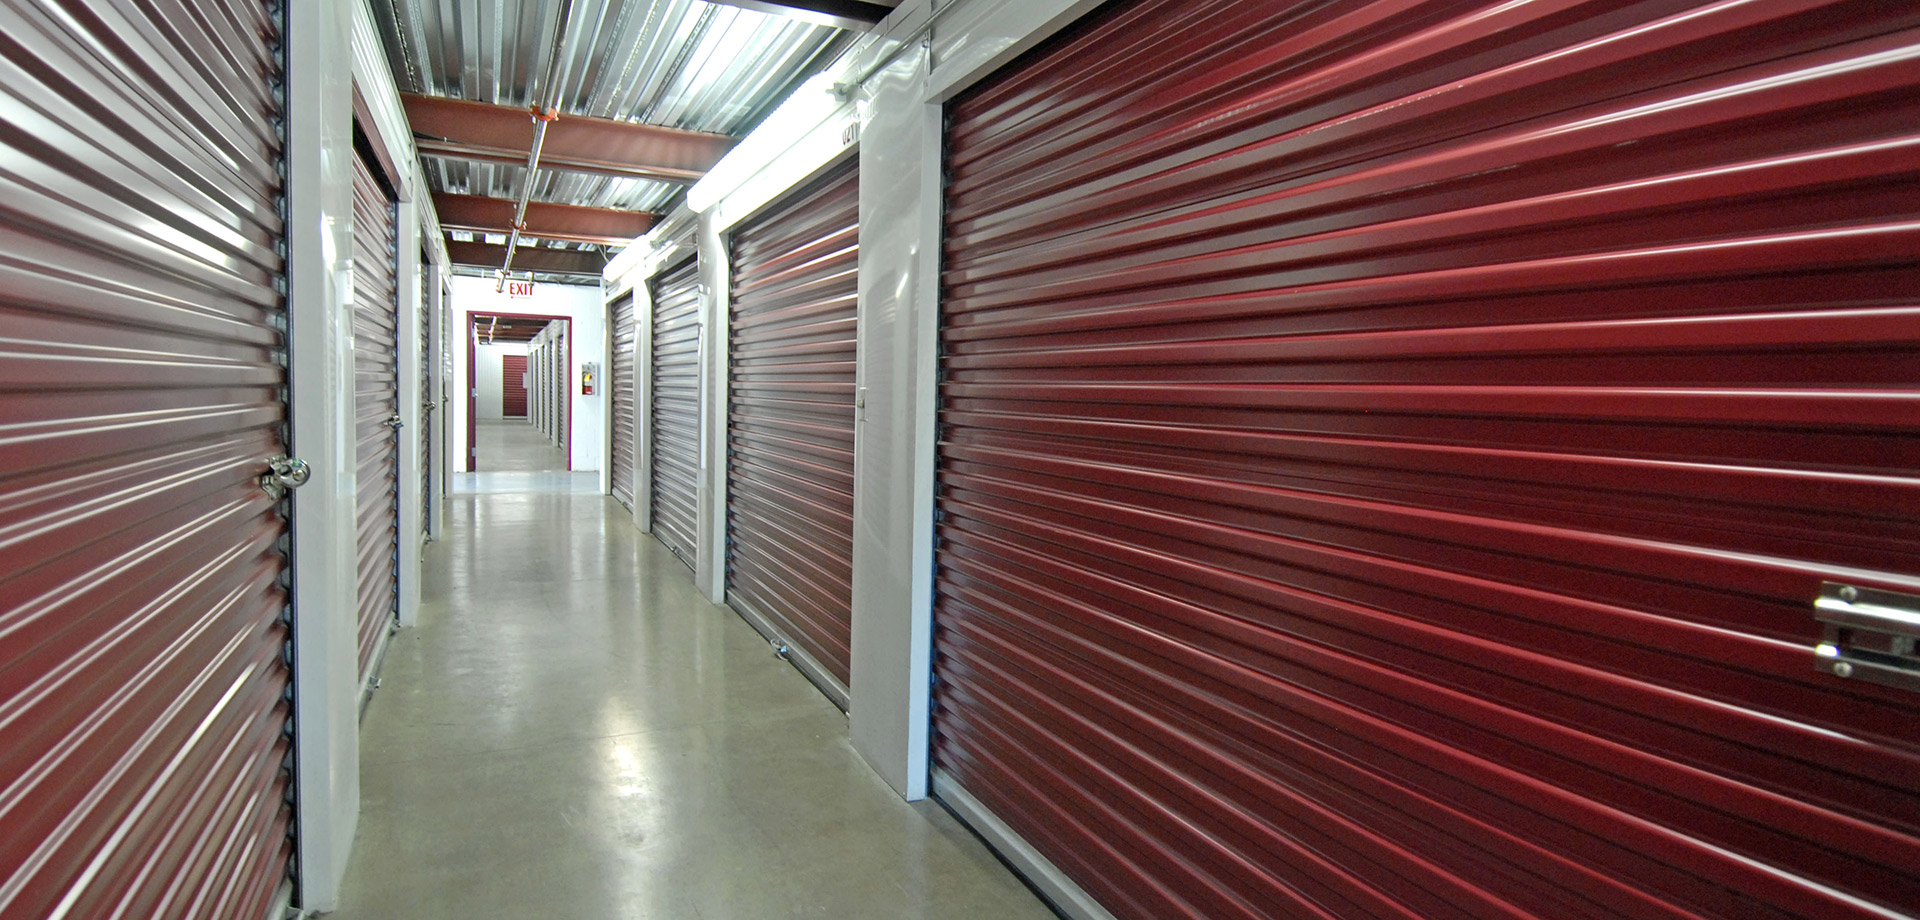 Image of storage locker hallway from a different angle